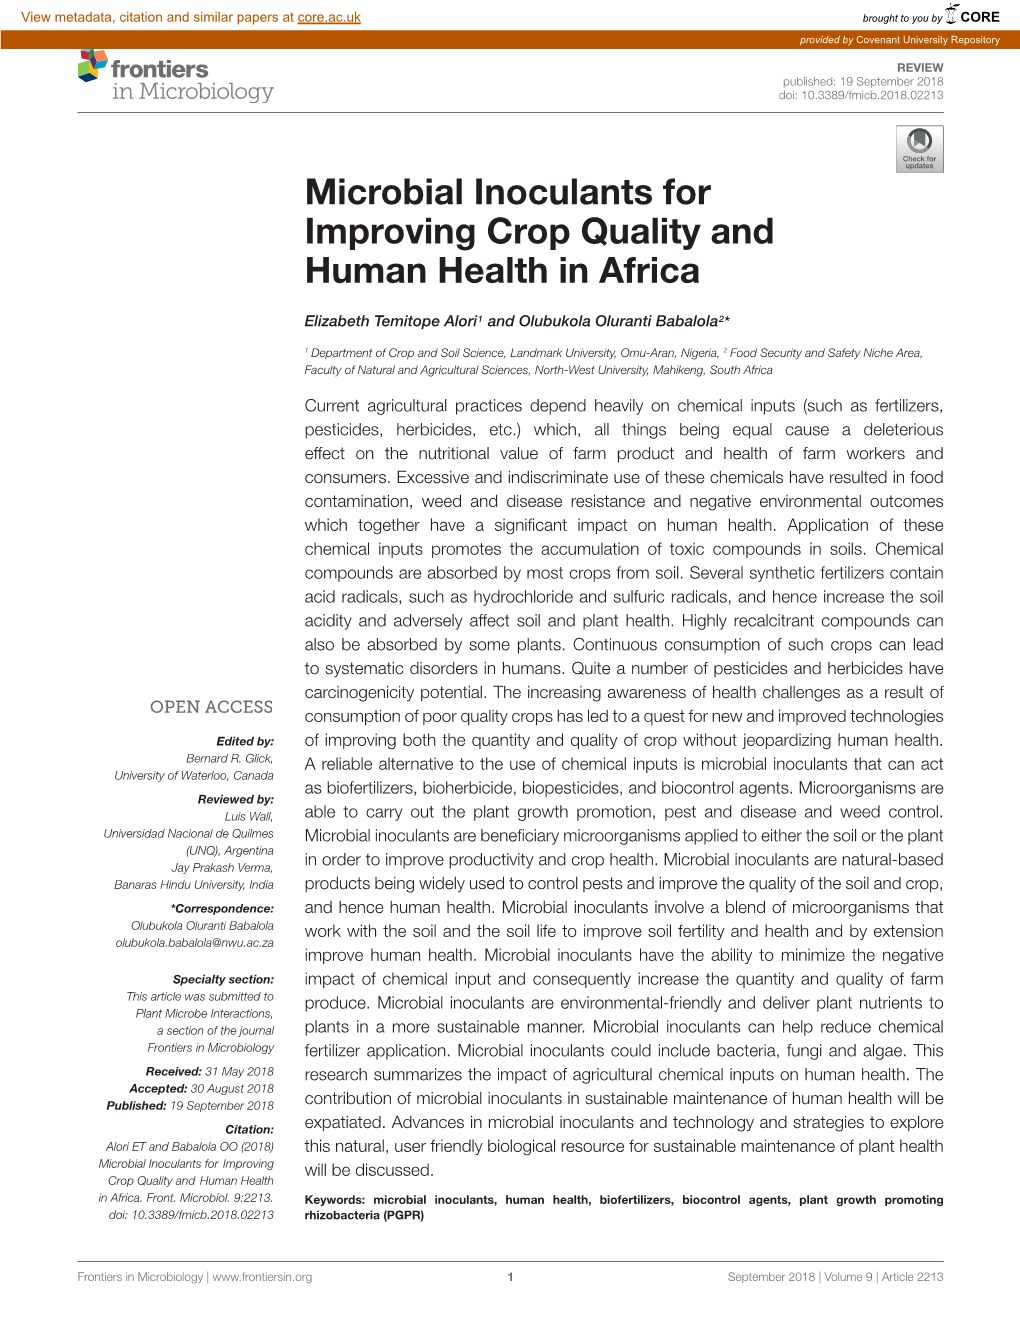 Microbial Inoculants for Improving Crop Quality and Human Health in Africa